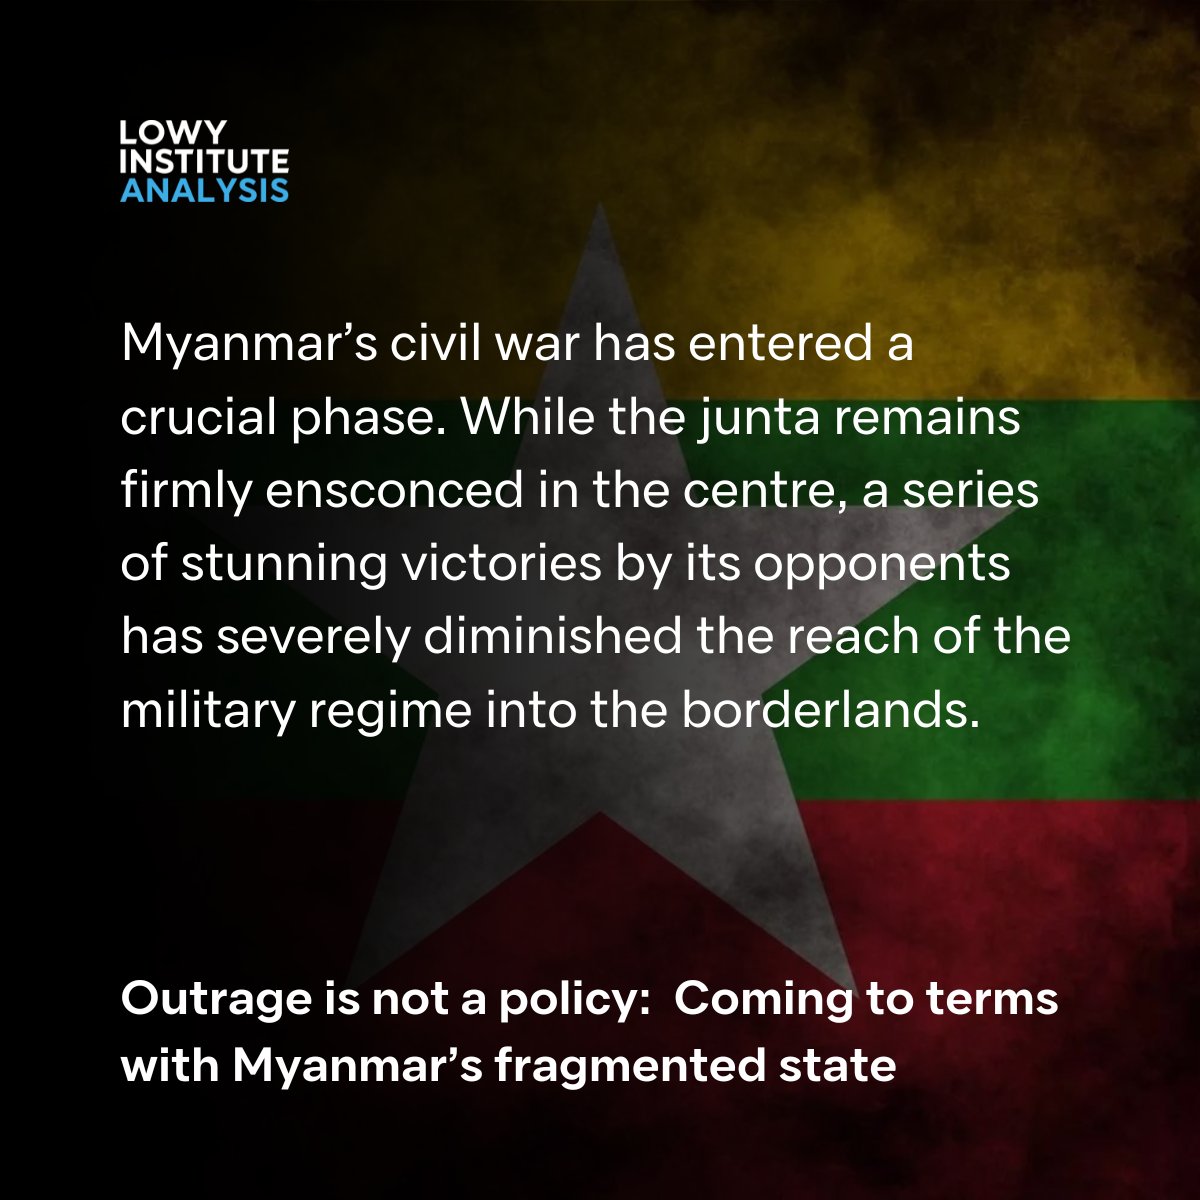 In a new @LowyInstitute Analysis, Morten Pedersen examines the evolution of Myanmar's civil war and argues the West should prioritise parallel state-building to support communities liberated from the junta's rule. lowyinstitute.org/publications/o…